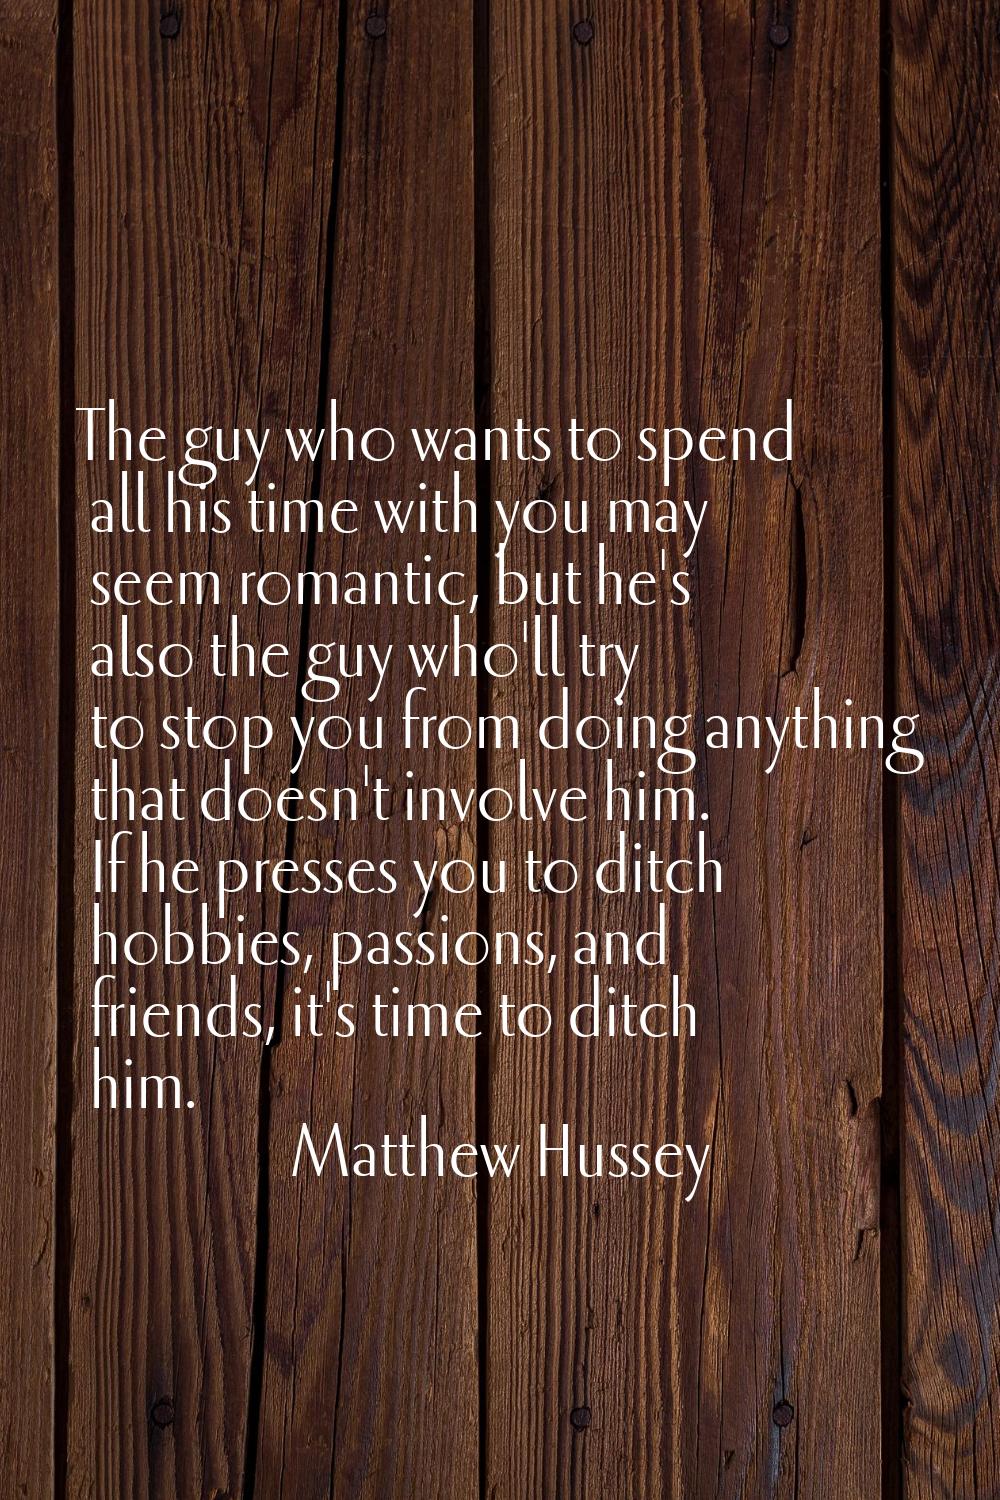 The guy who wants to spend all his time with you may seem romantic, but he's also the guy who'll tr